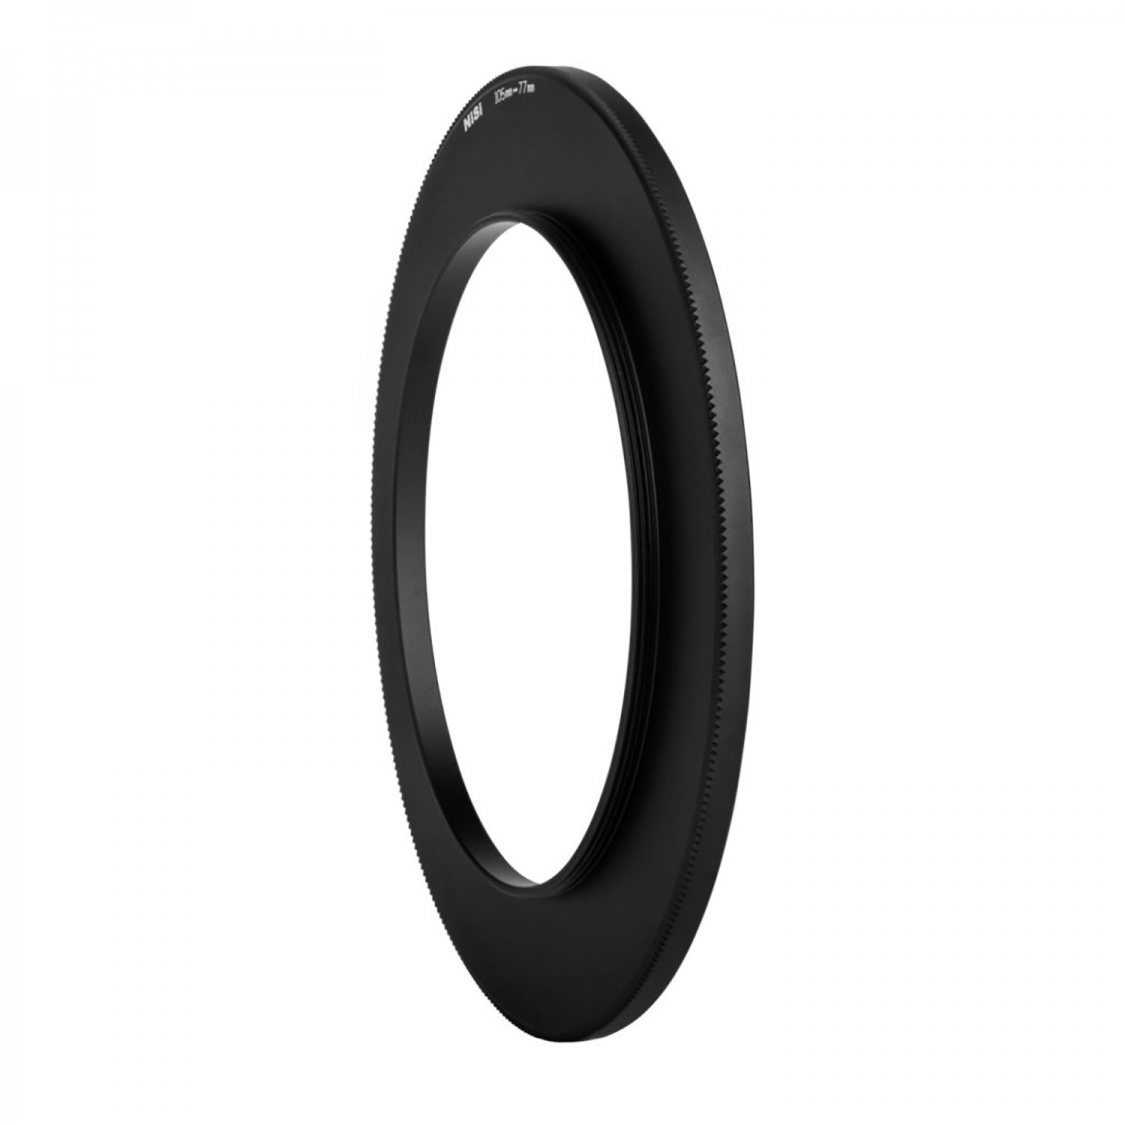 NiSi 62-105mm Adaptor for S5 for Standard Filter Threads